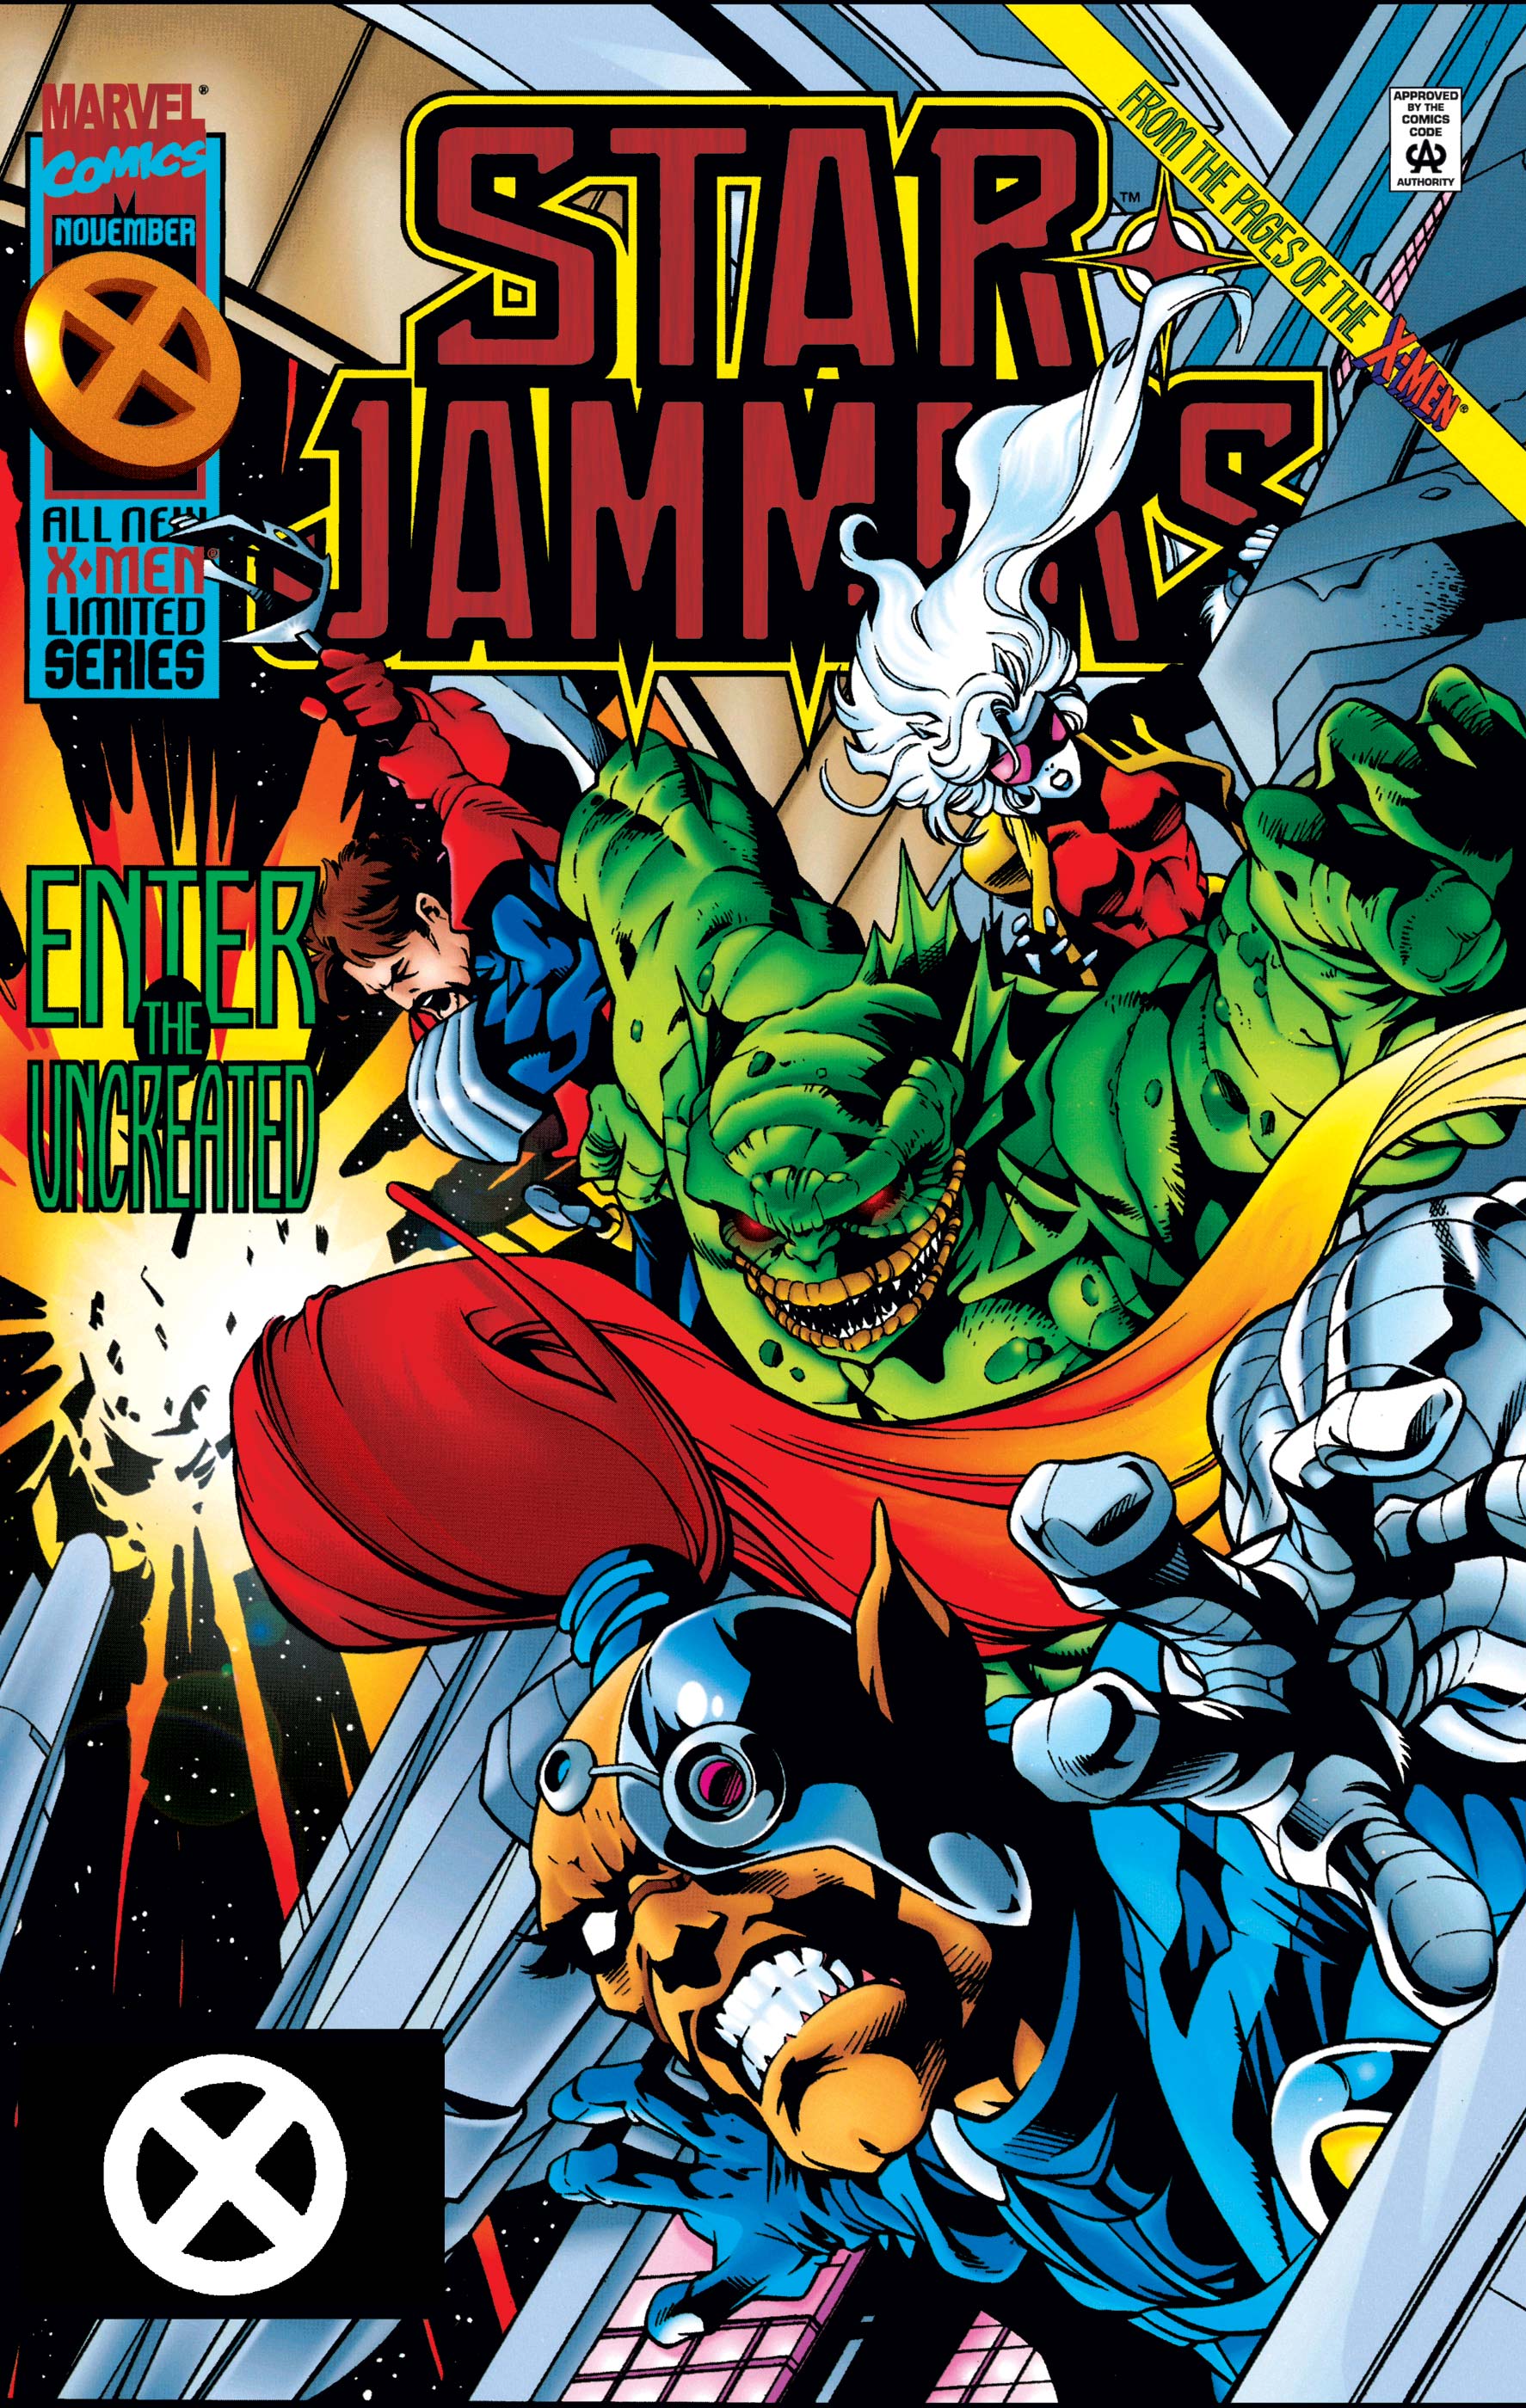 Starjammers (1995) #2